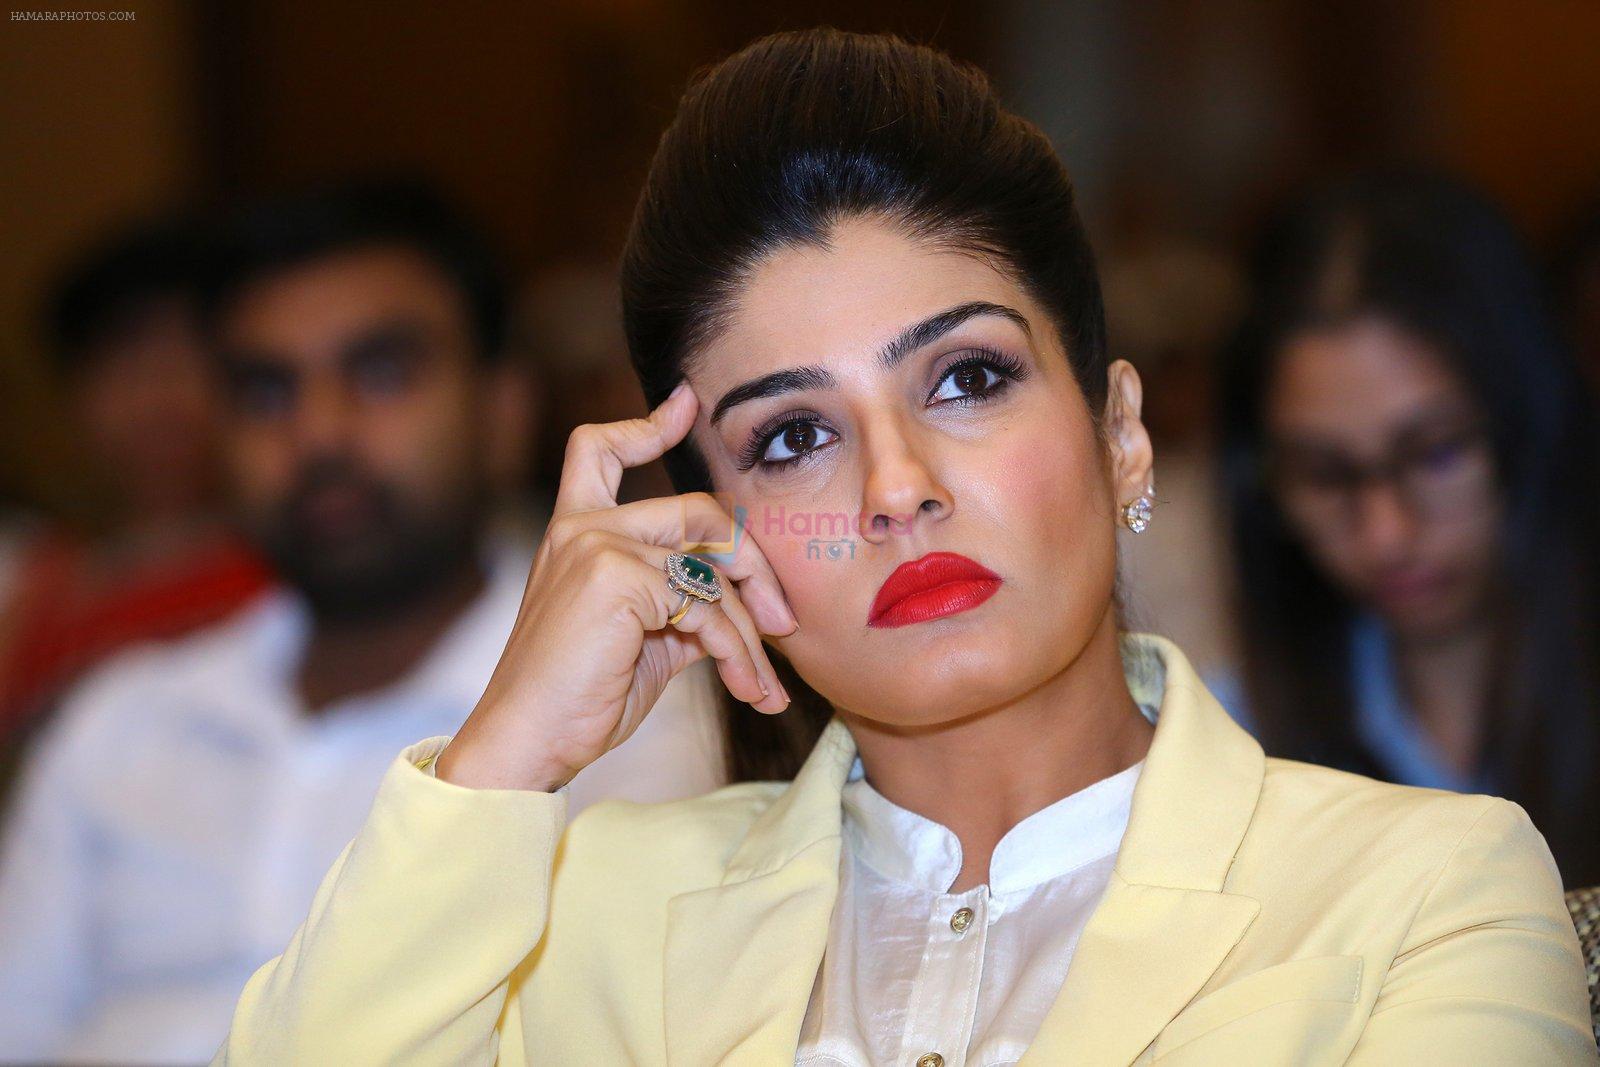 Raveena Tandon at safe women fundation programme in delhi hotel lalit on 18th May 2016